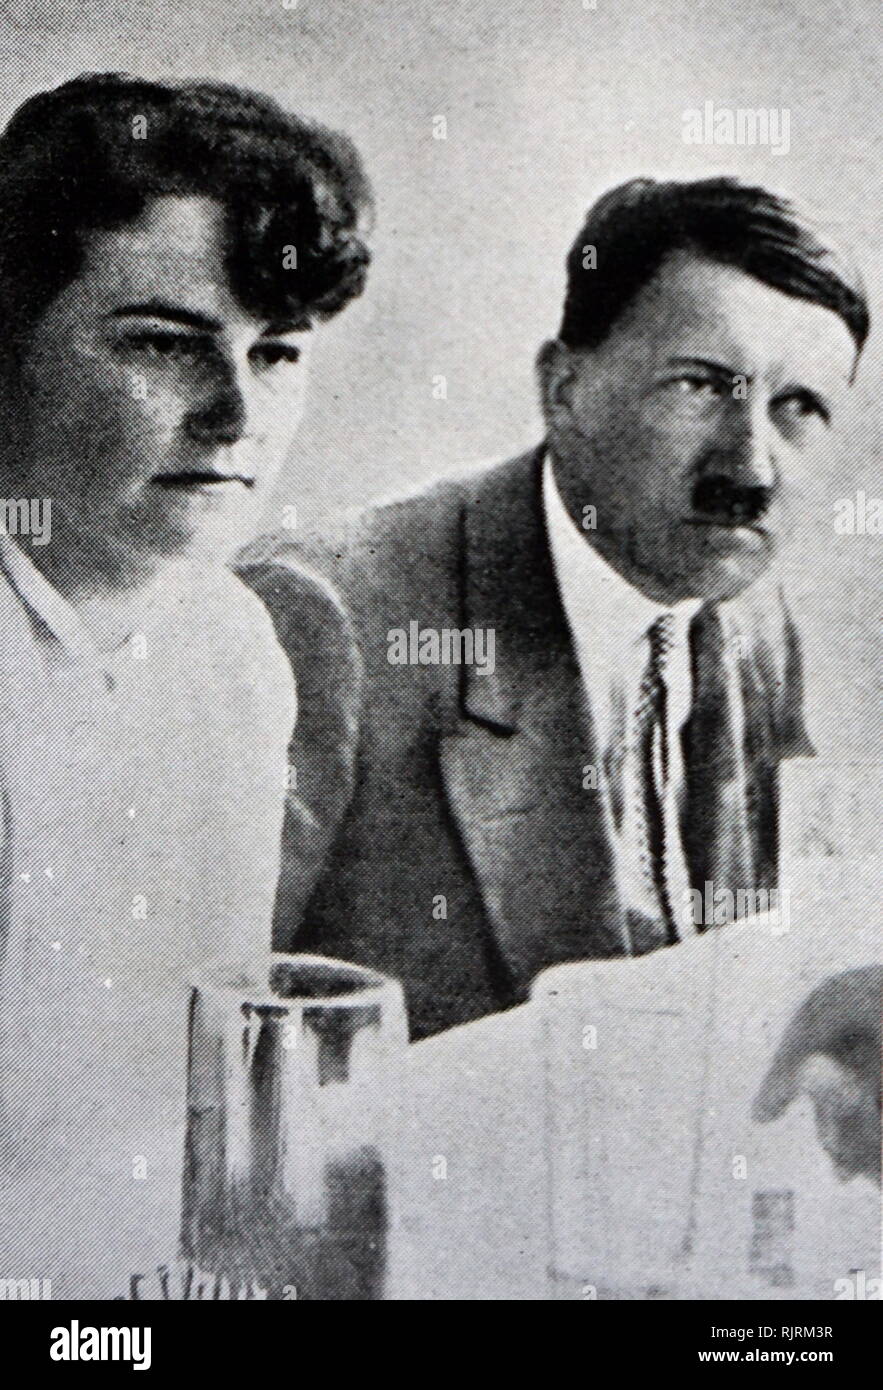 Adolf Hitler (1889 - 1945); leader of the Nazi Party with Angela Maria 'Geli' Raubal (1908 - 1931); Adolf Hitler's half-niece. Born in Linz, Austria-Hungary, she was the second child and eldest daughter of Leo Raubal Sr. and Hitler's half-sister, Angela Raubal. Raubal lived in close contact to her uncle from 1925 until her presumed suicide in 1931. Stock Photo